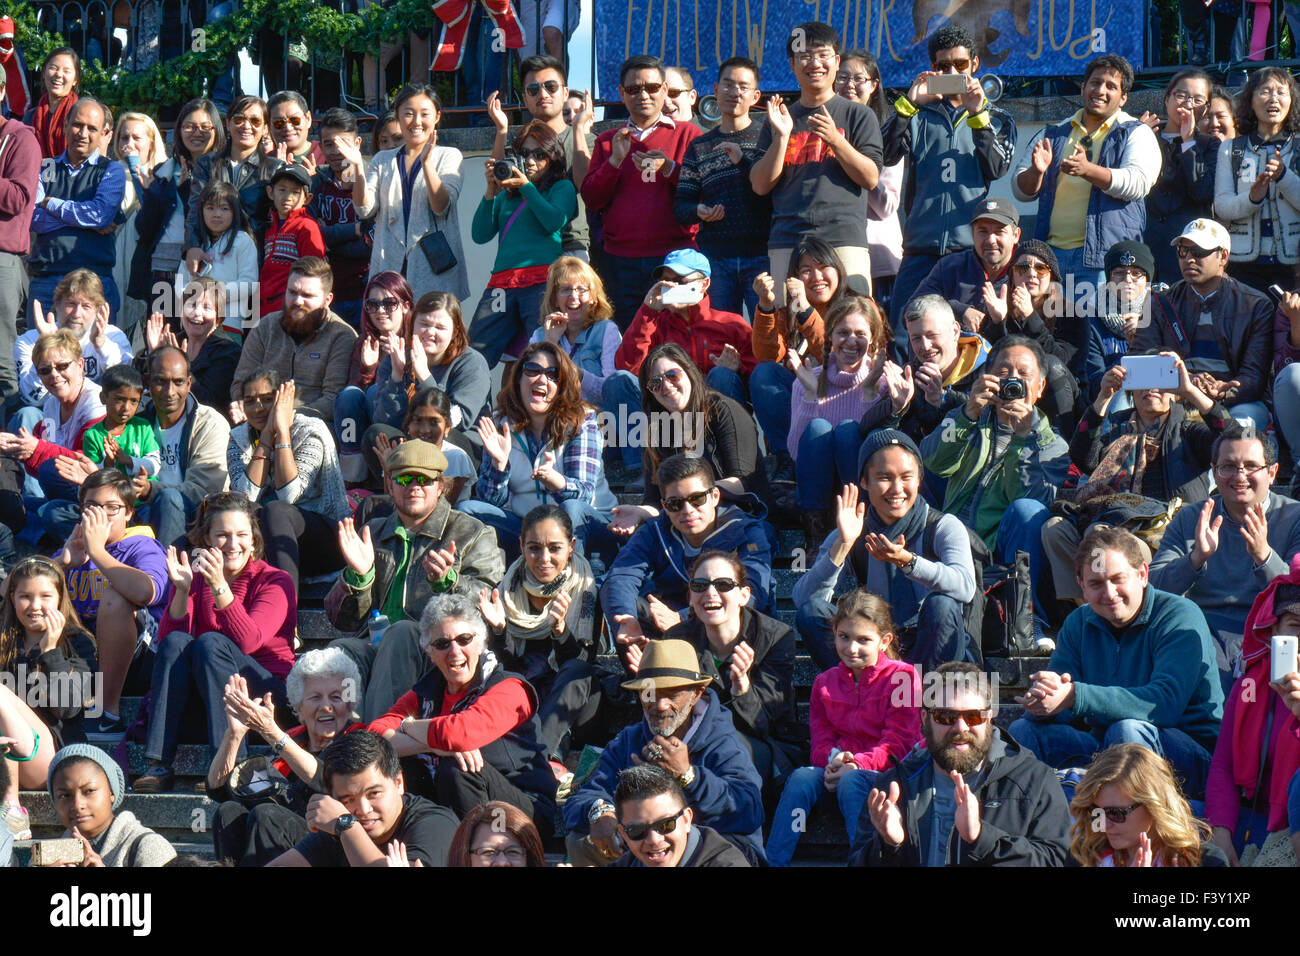 Crowd of ethnically diverse people of all ages, in the USA, some sitting,  some standing while laughing & applauding while watching performance art. Stock Photo